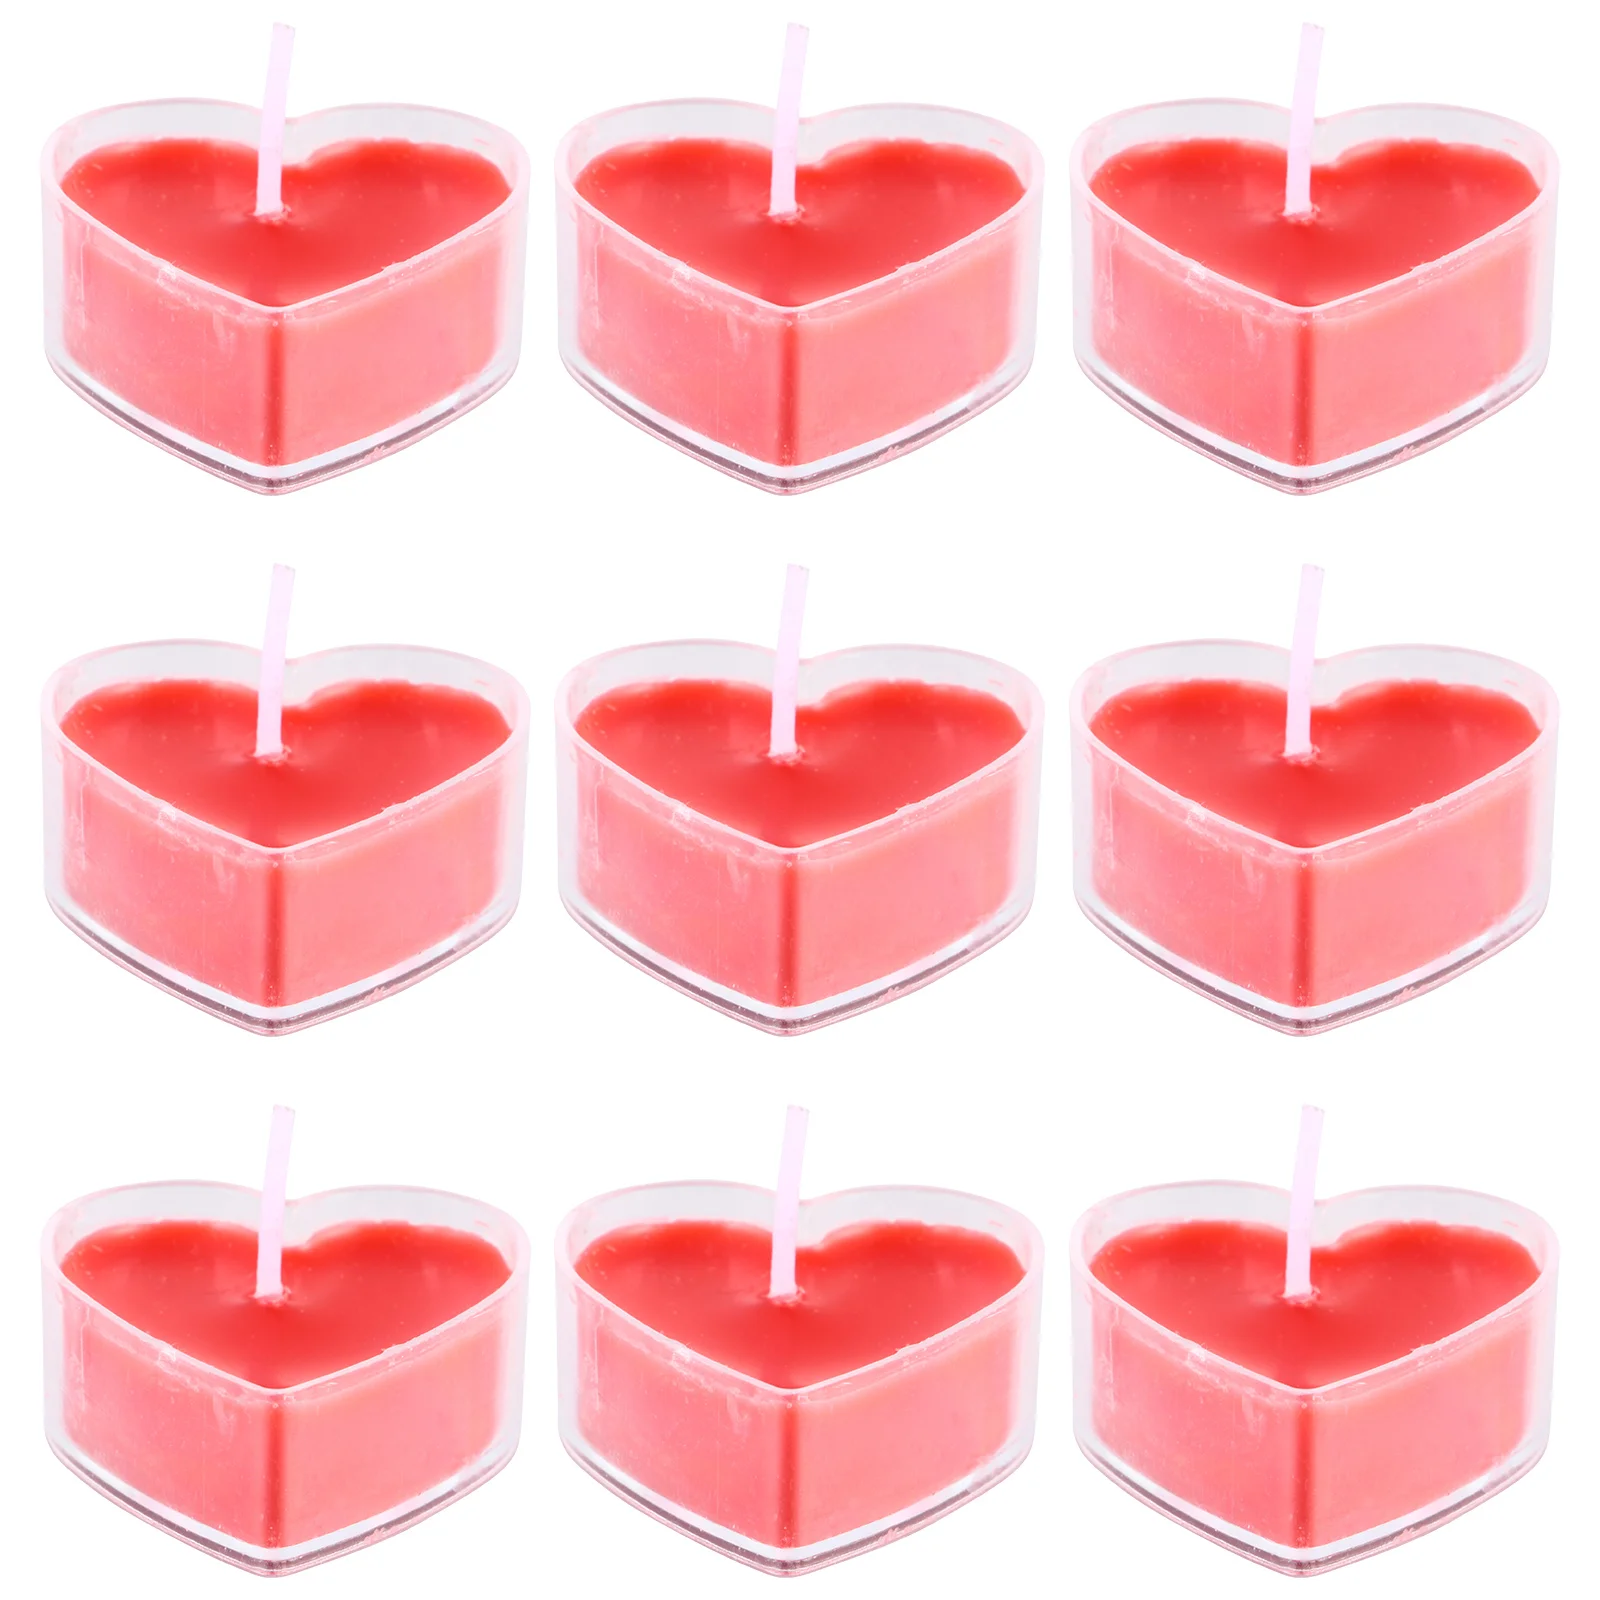 

Candleheart Love Scented Romantic Tealight Valentine Proposal Wedding Shape Partys Decorative Favors Lights Marriage Teastyle